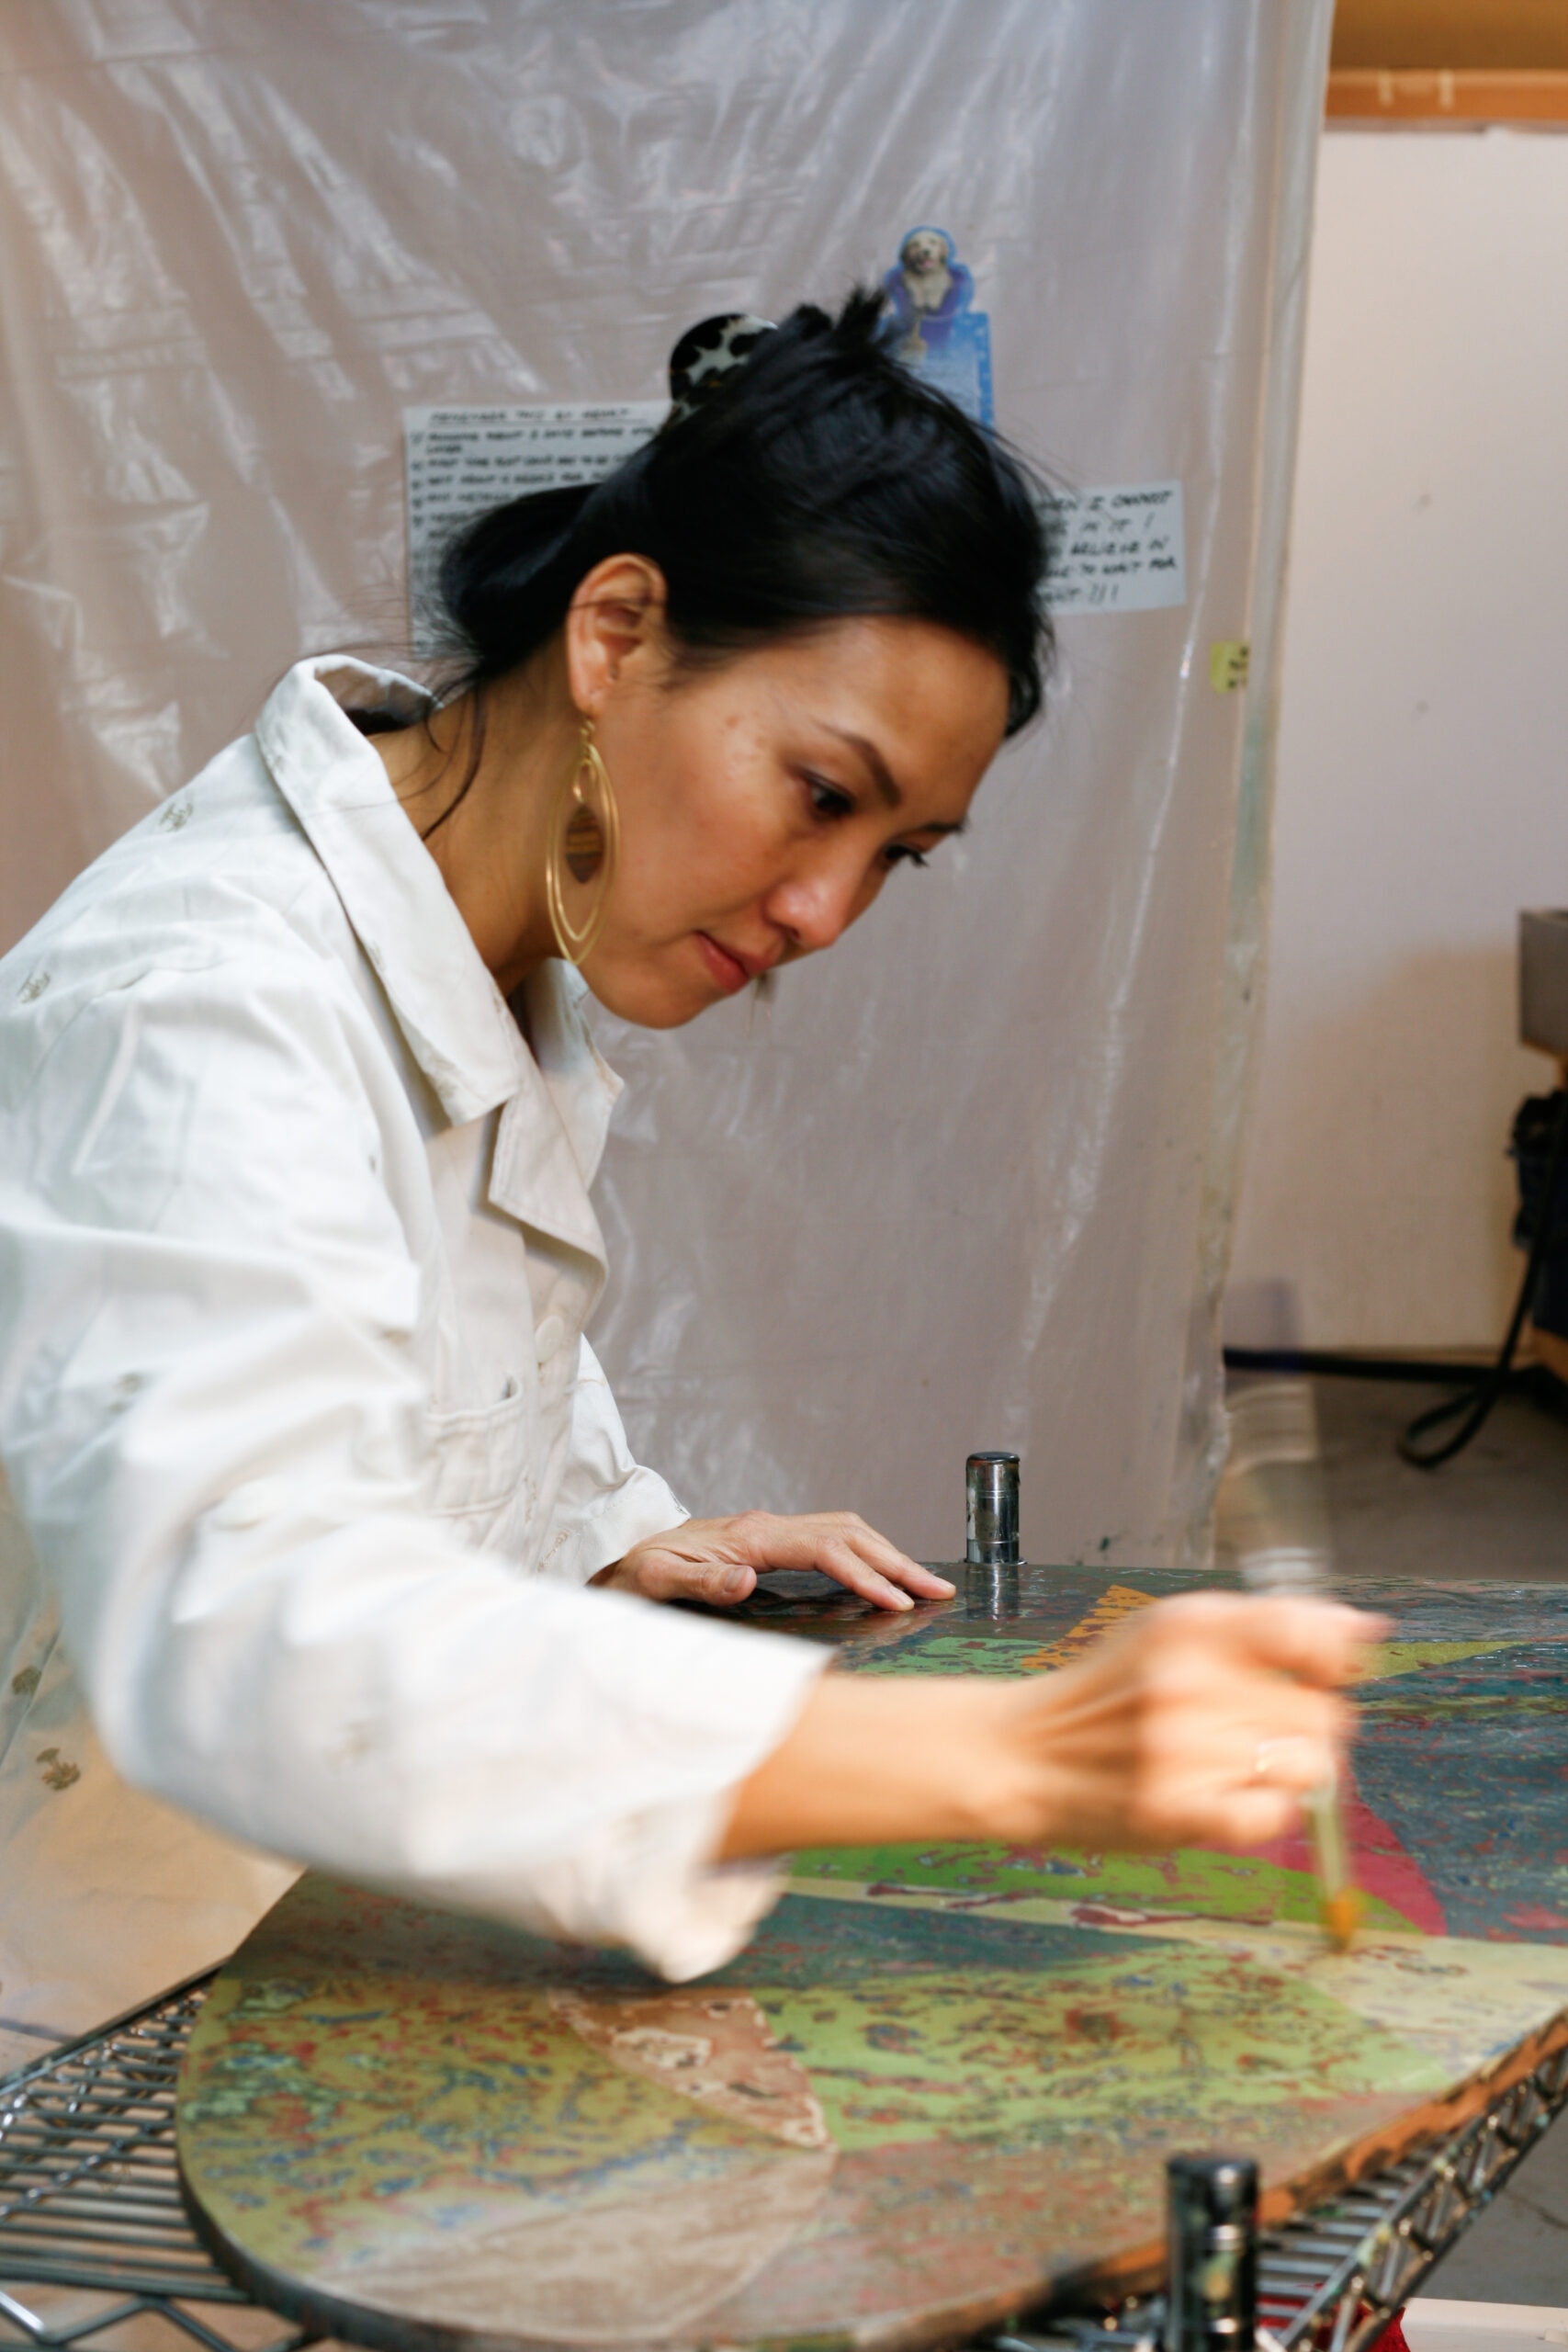 A person of light skin tone painting and working on a patterned surface.